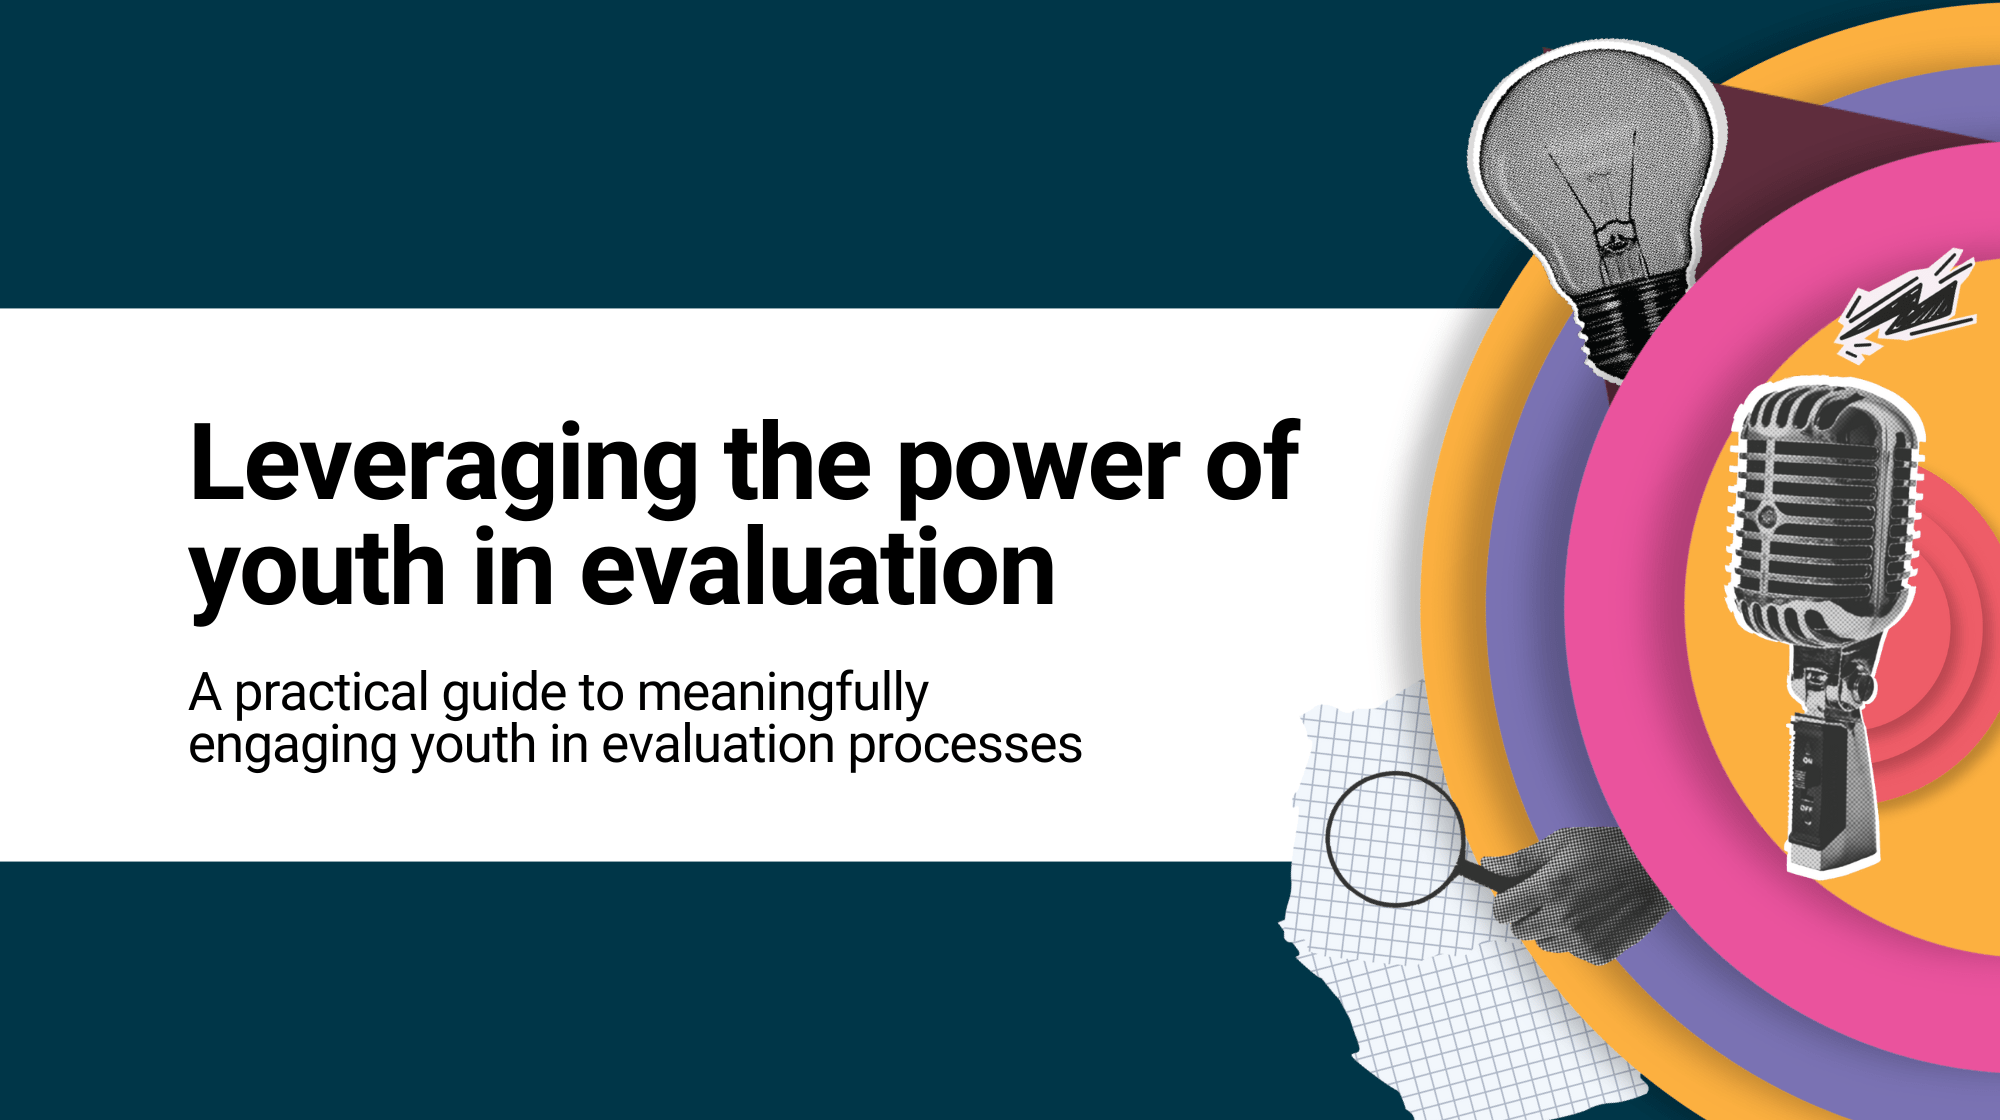 Leveraging the power of youth in evaluation, A practical guide to meaningfully engaging youth in evaluation processes